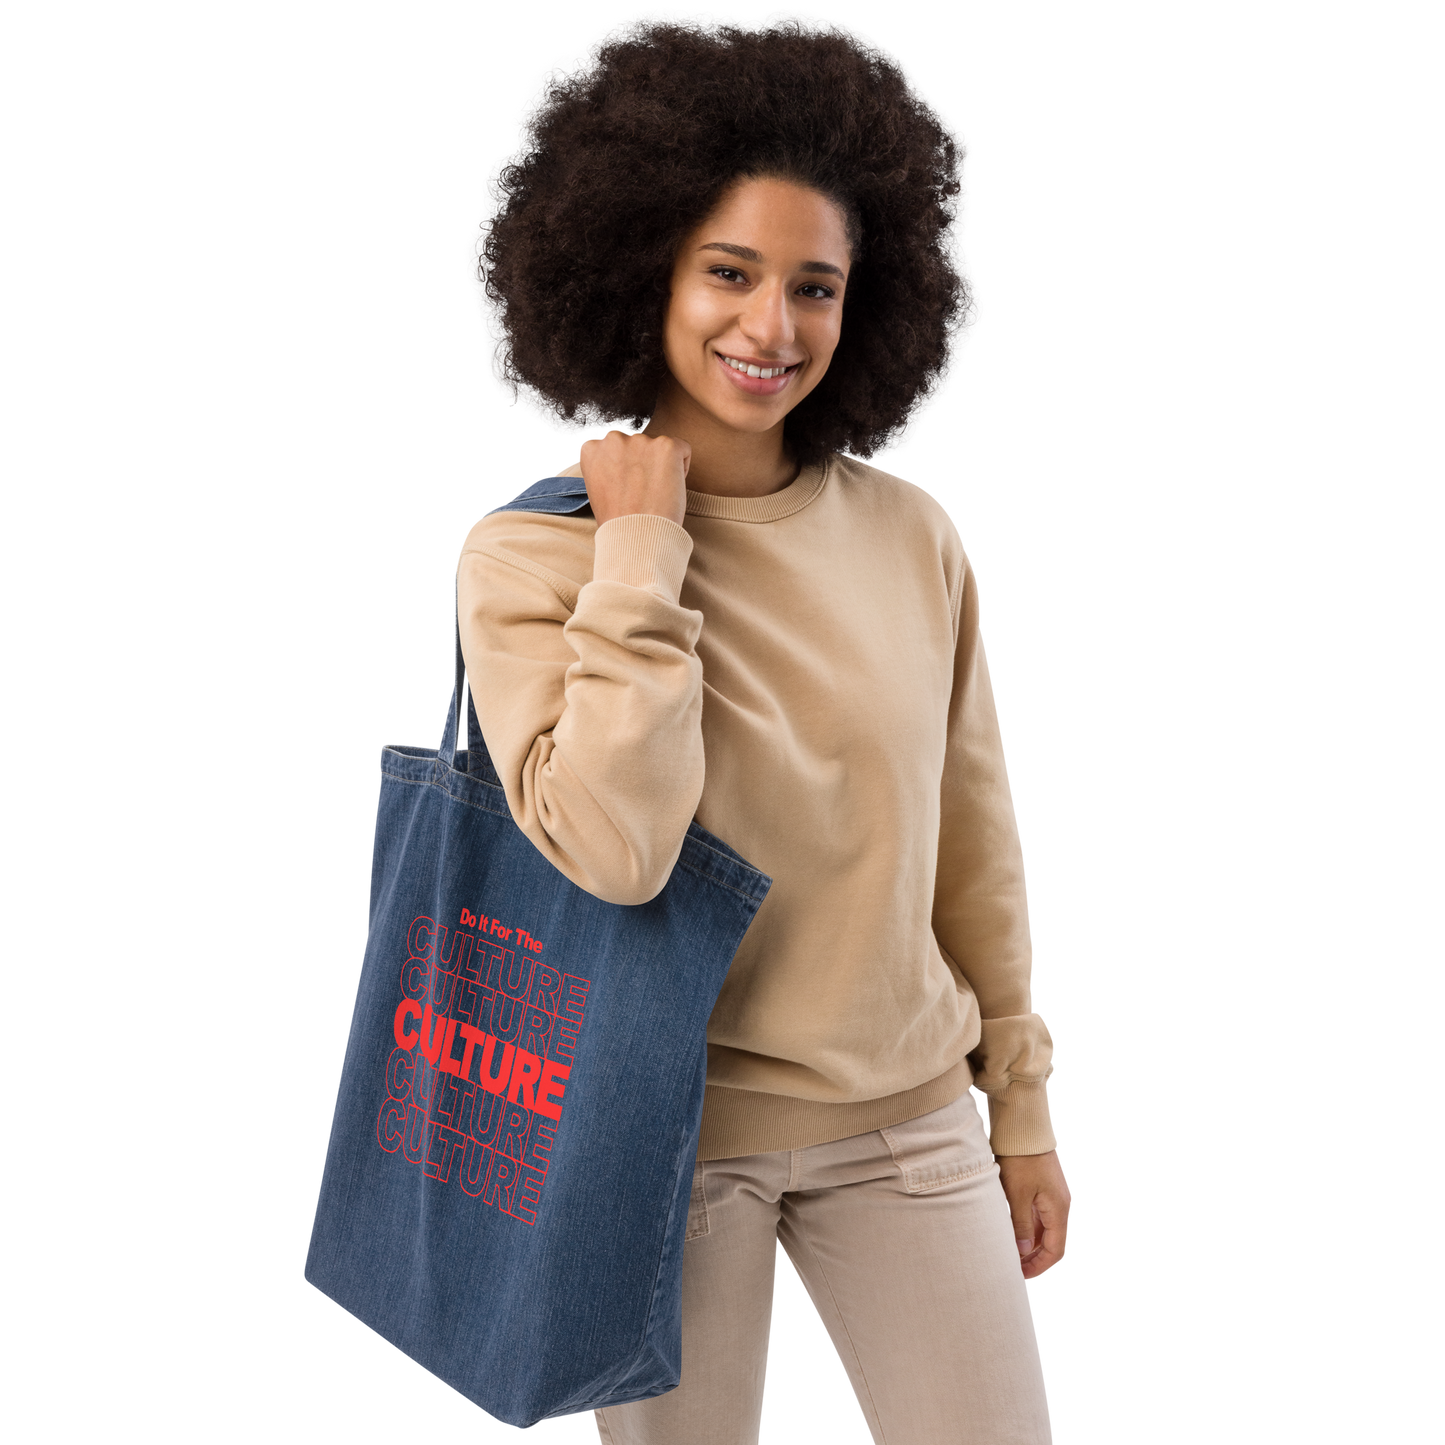 Do It For The Culture Organic Denim Tote Bag